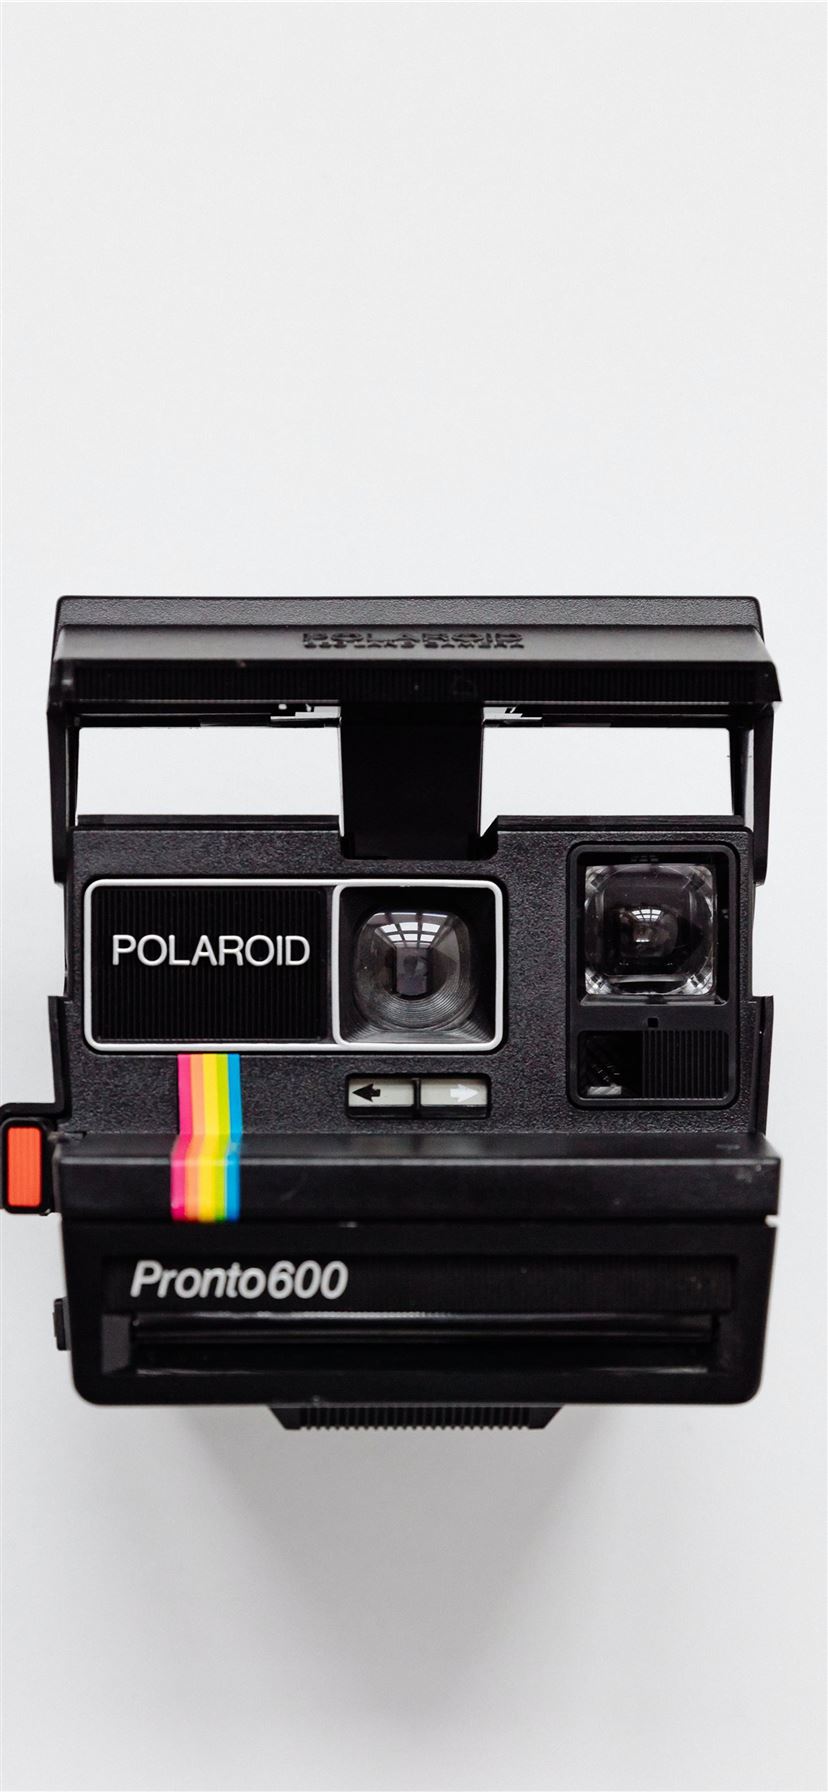 black Polaroid camera with white background iPhone 11 wallpaper 